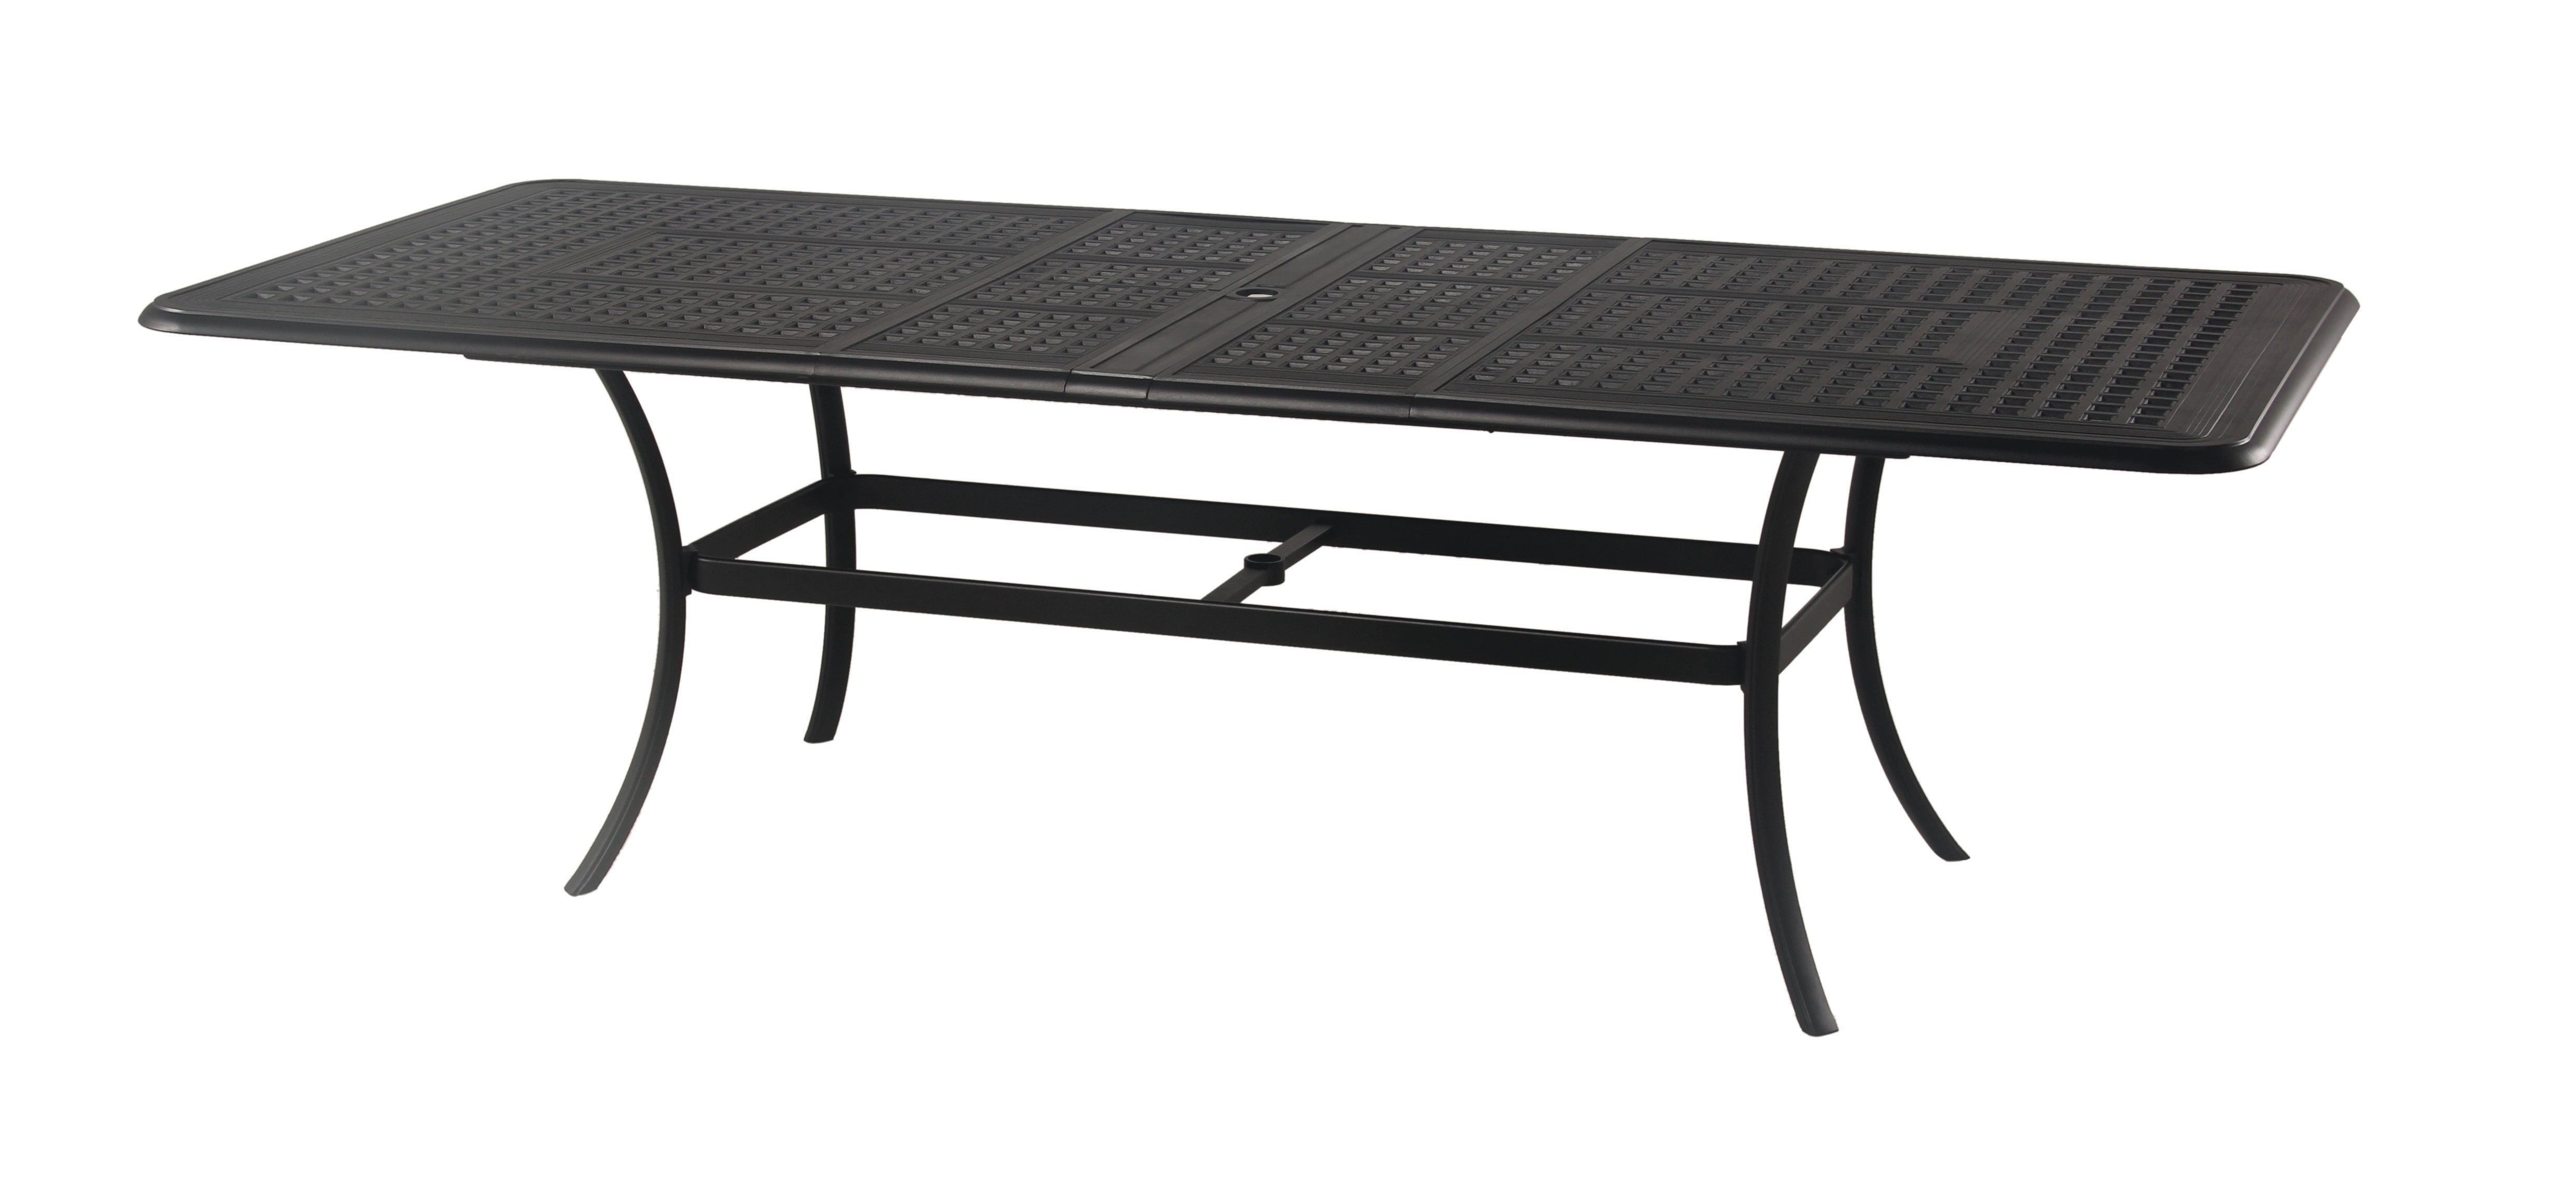 New Classic 42" x 76" Rect. Extension Table (Terra Mist)